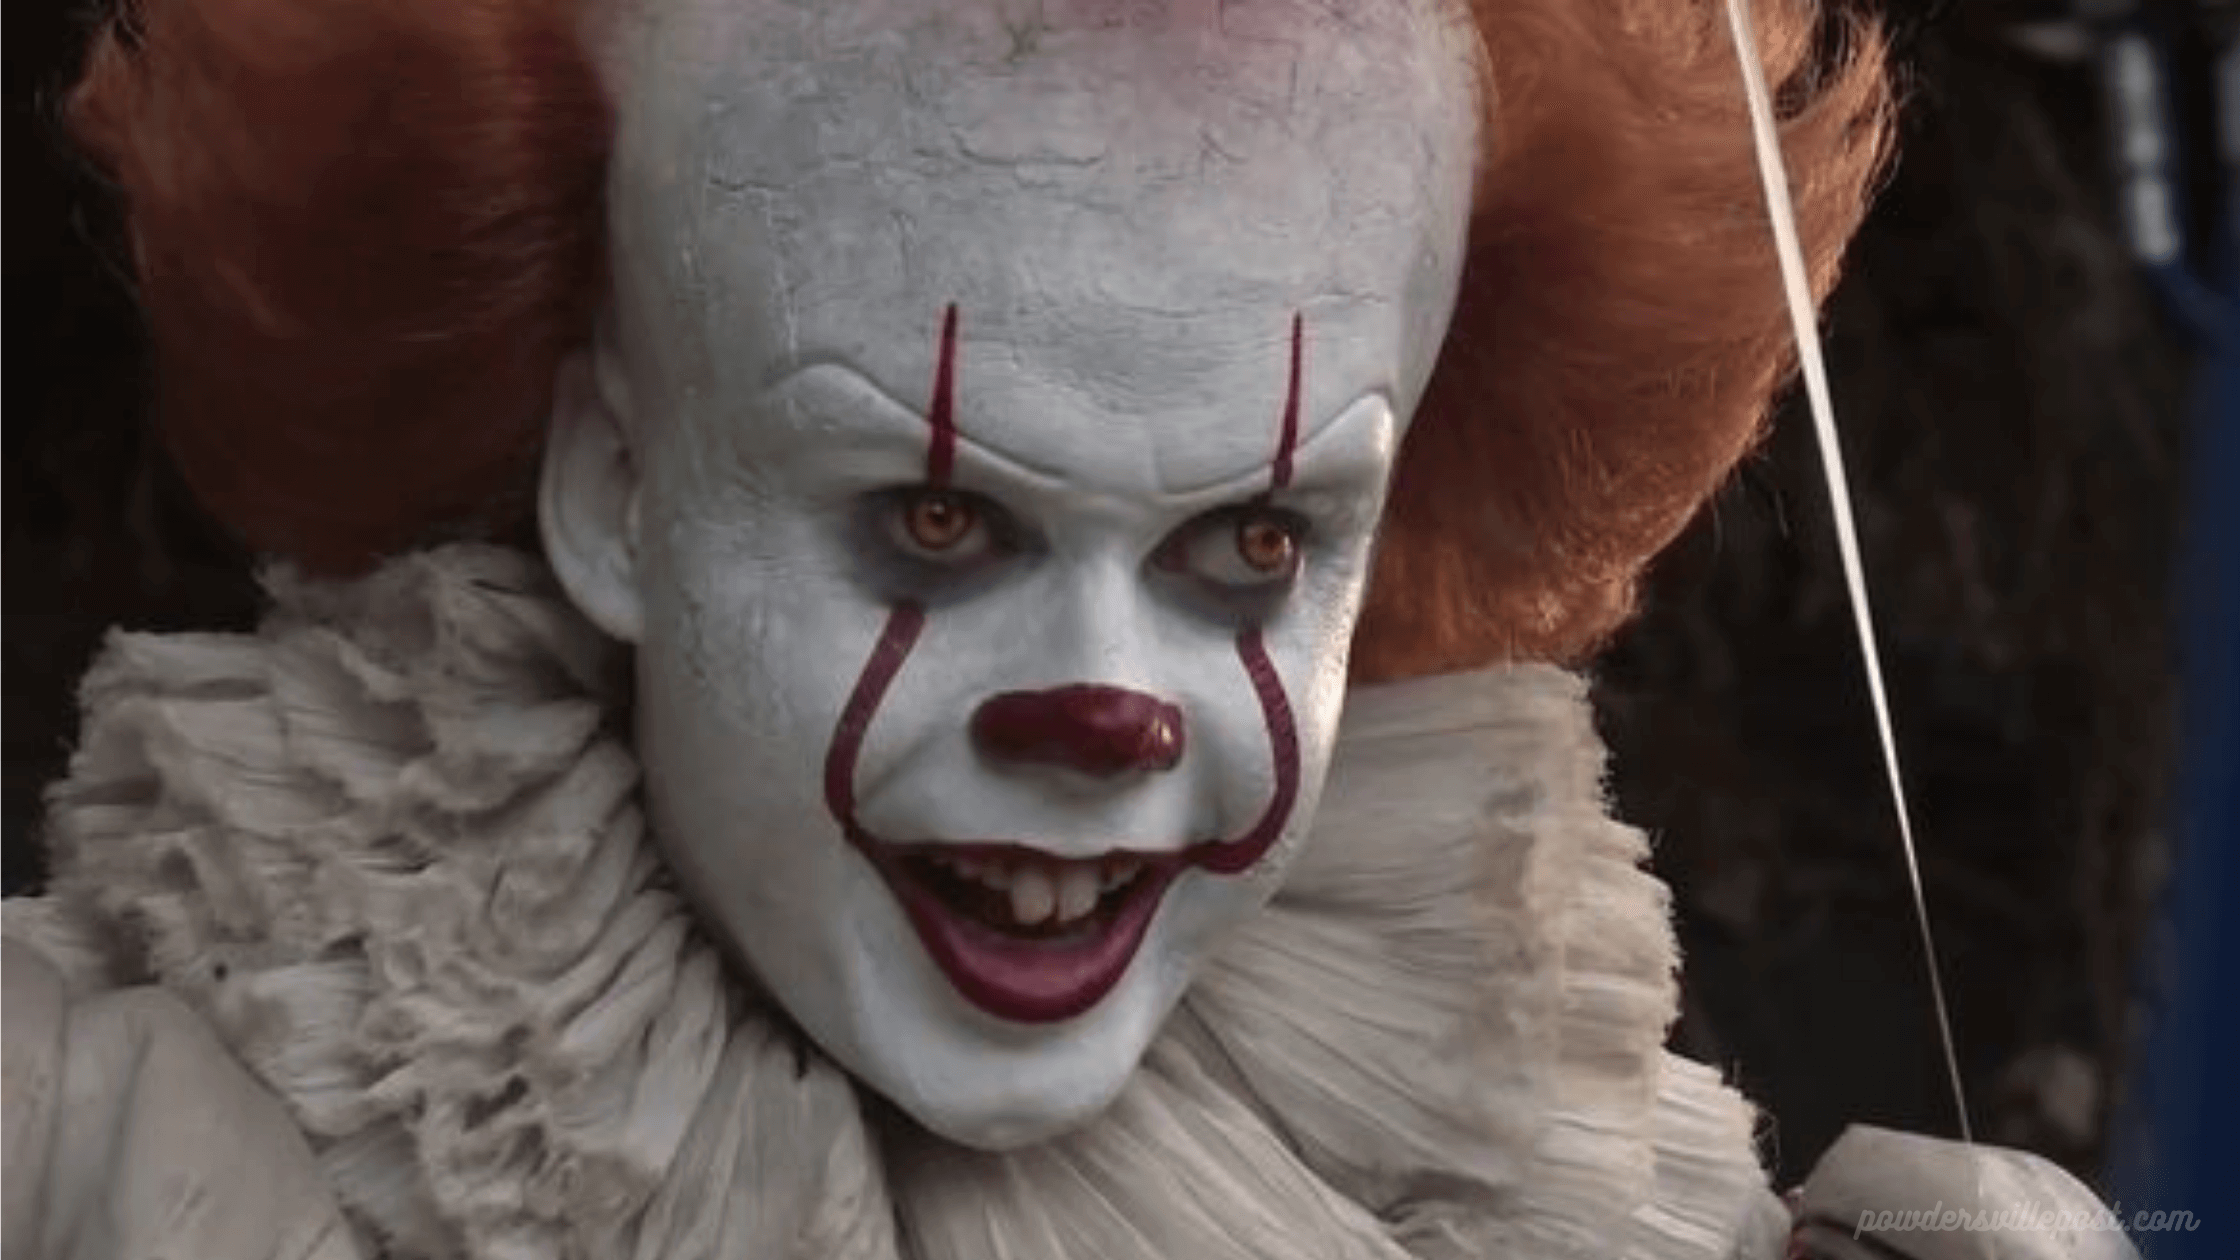 The Pennywise Could Make A Comeback On TV To Haunt Your Dreams Once More